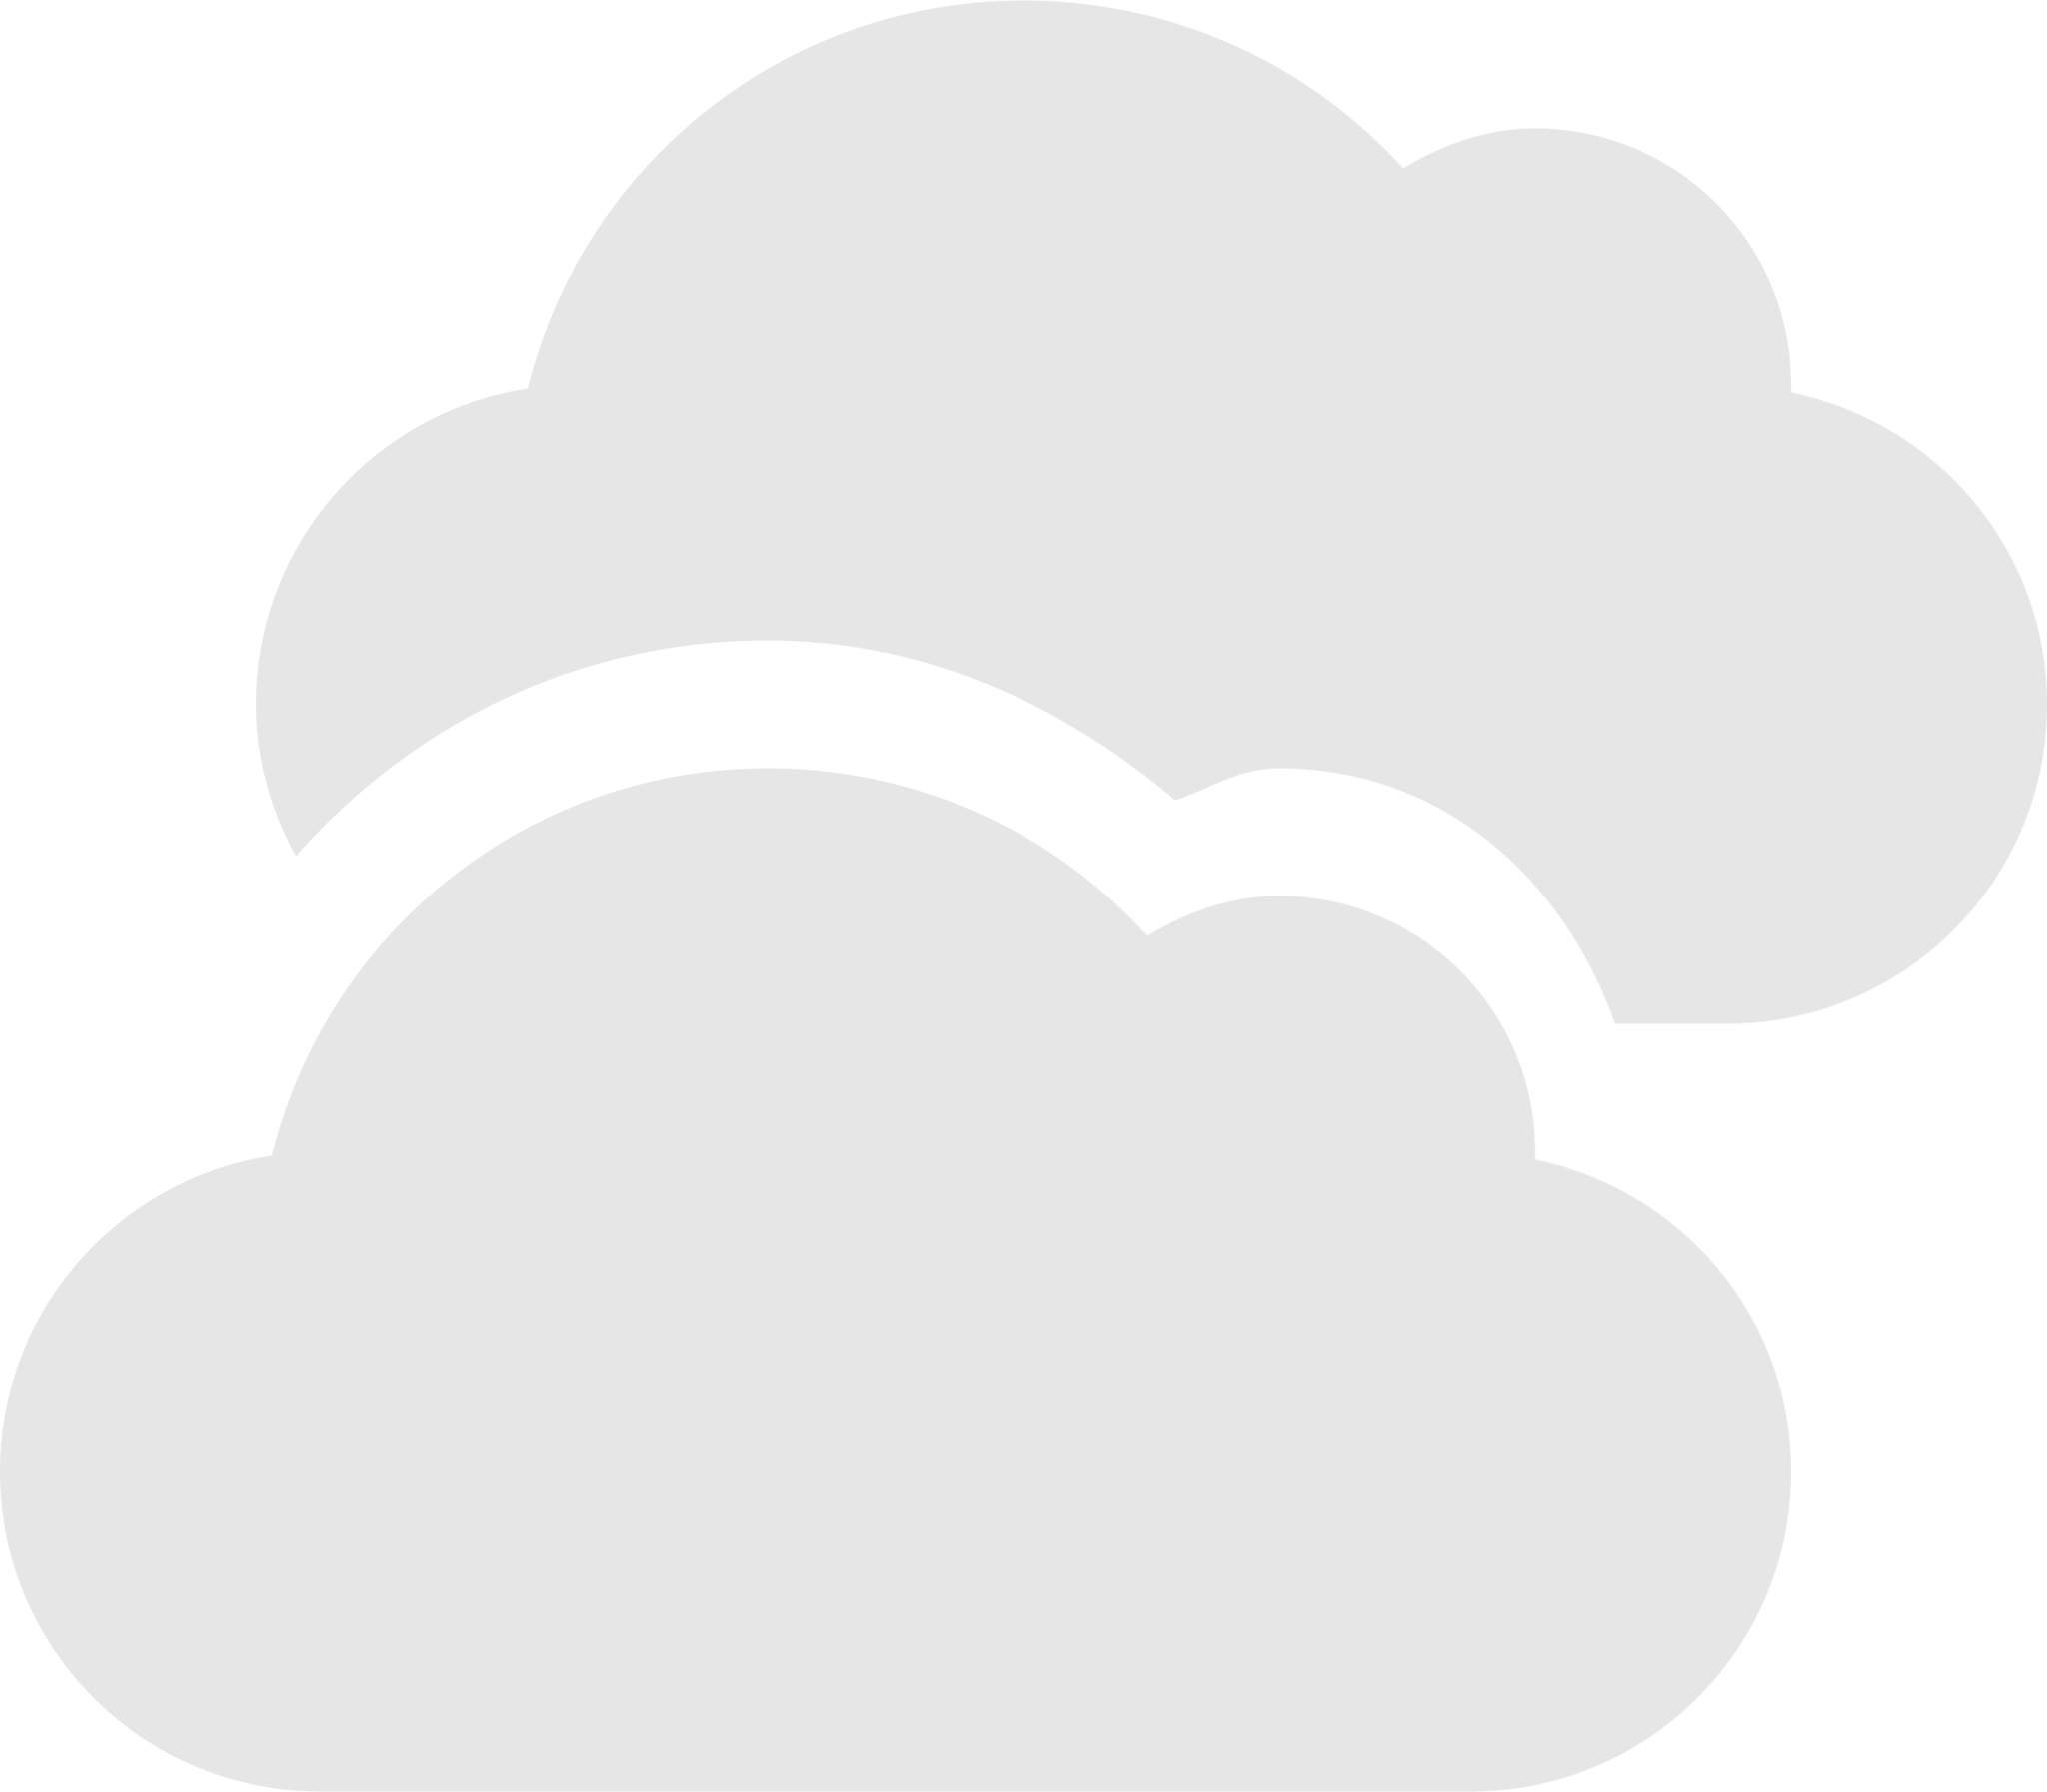 stock weather cloudy icon